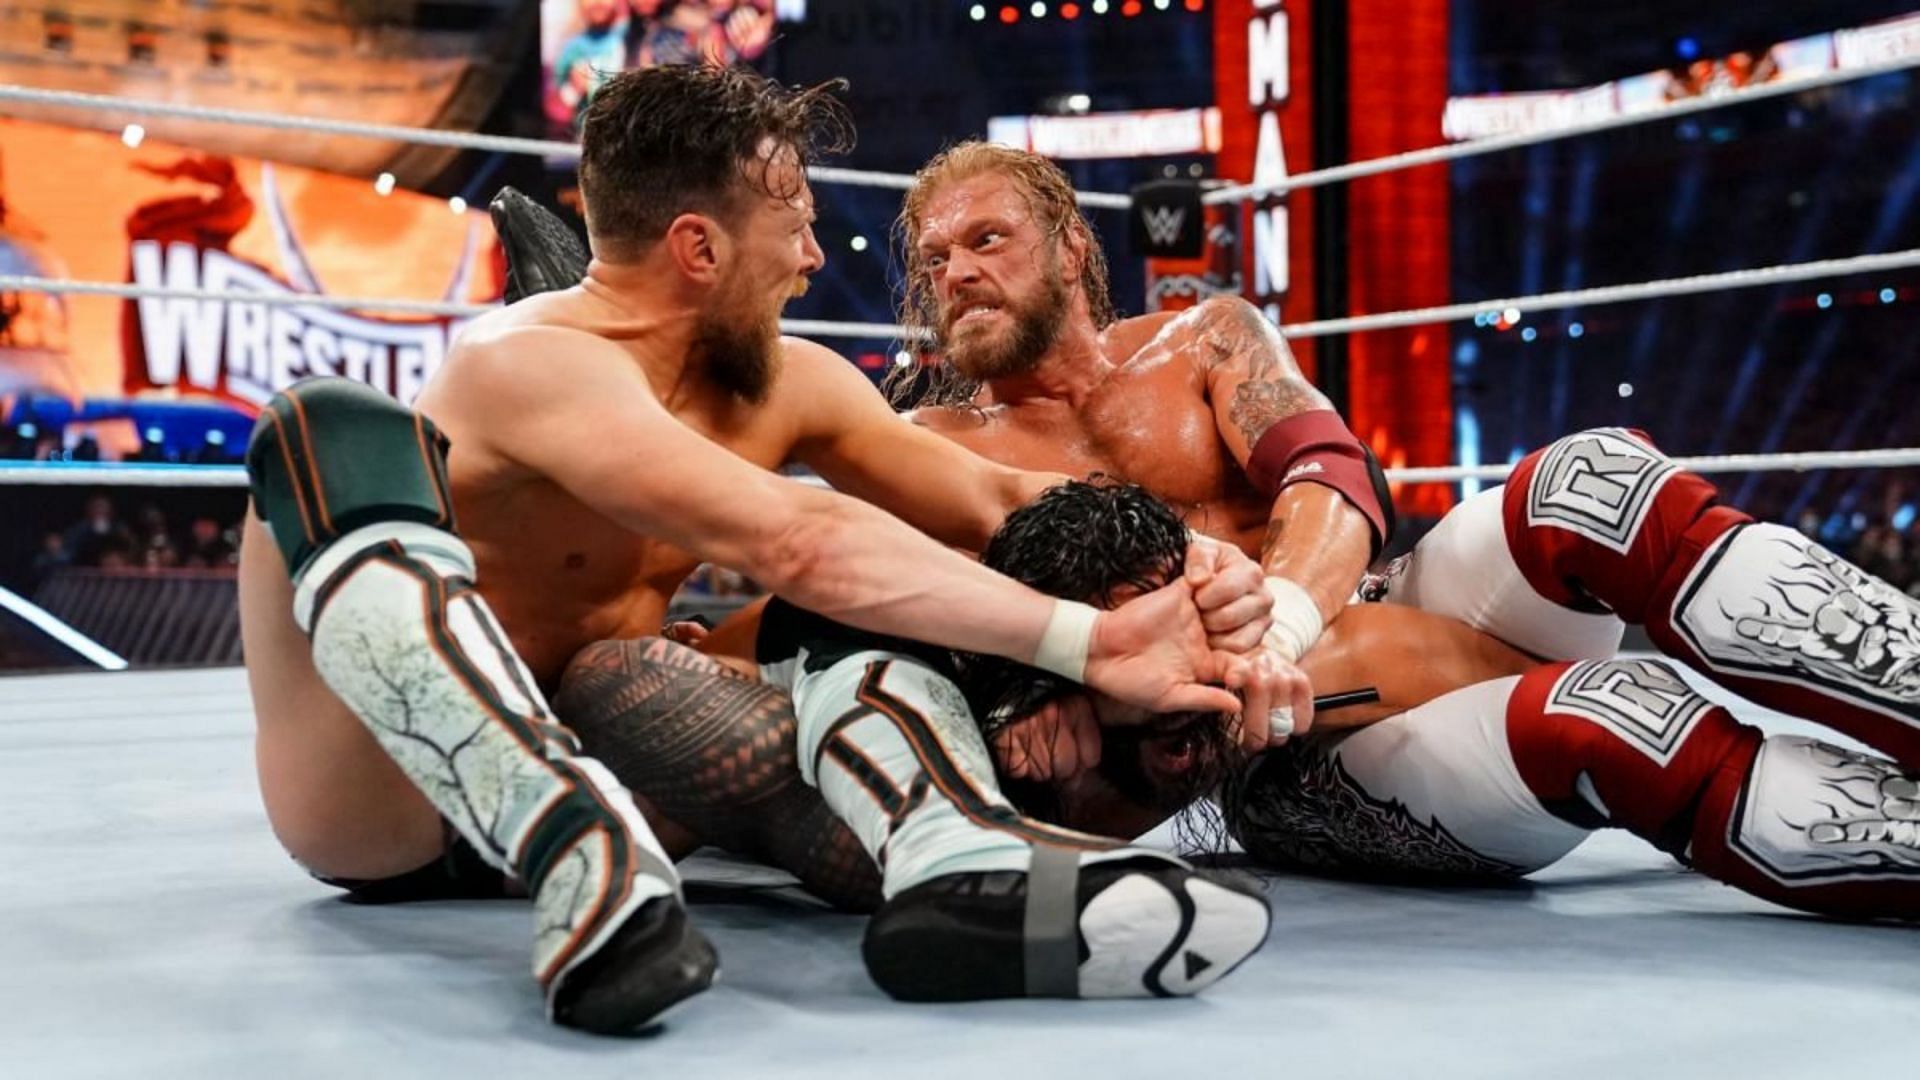 Bryan Danielson in a storyline with Edge and Roman Reigns